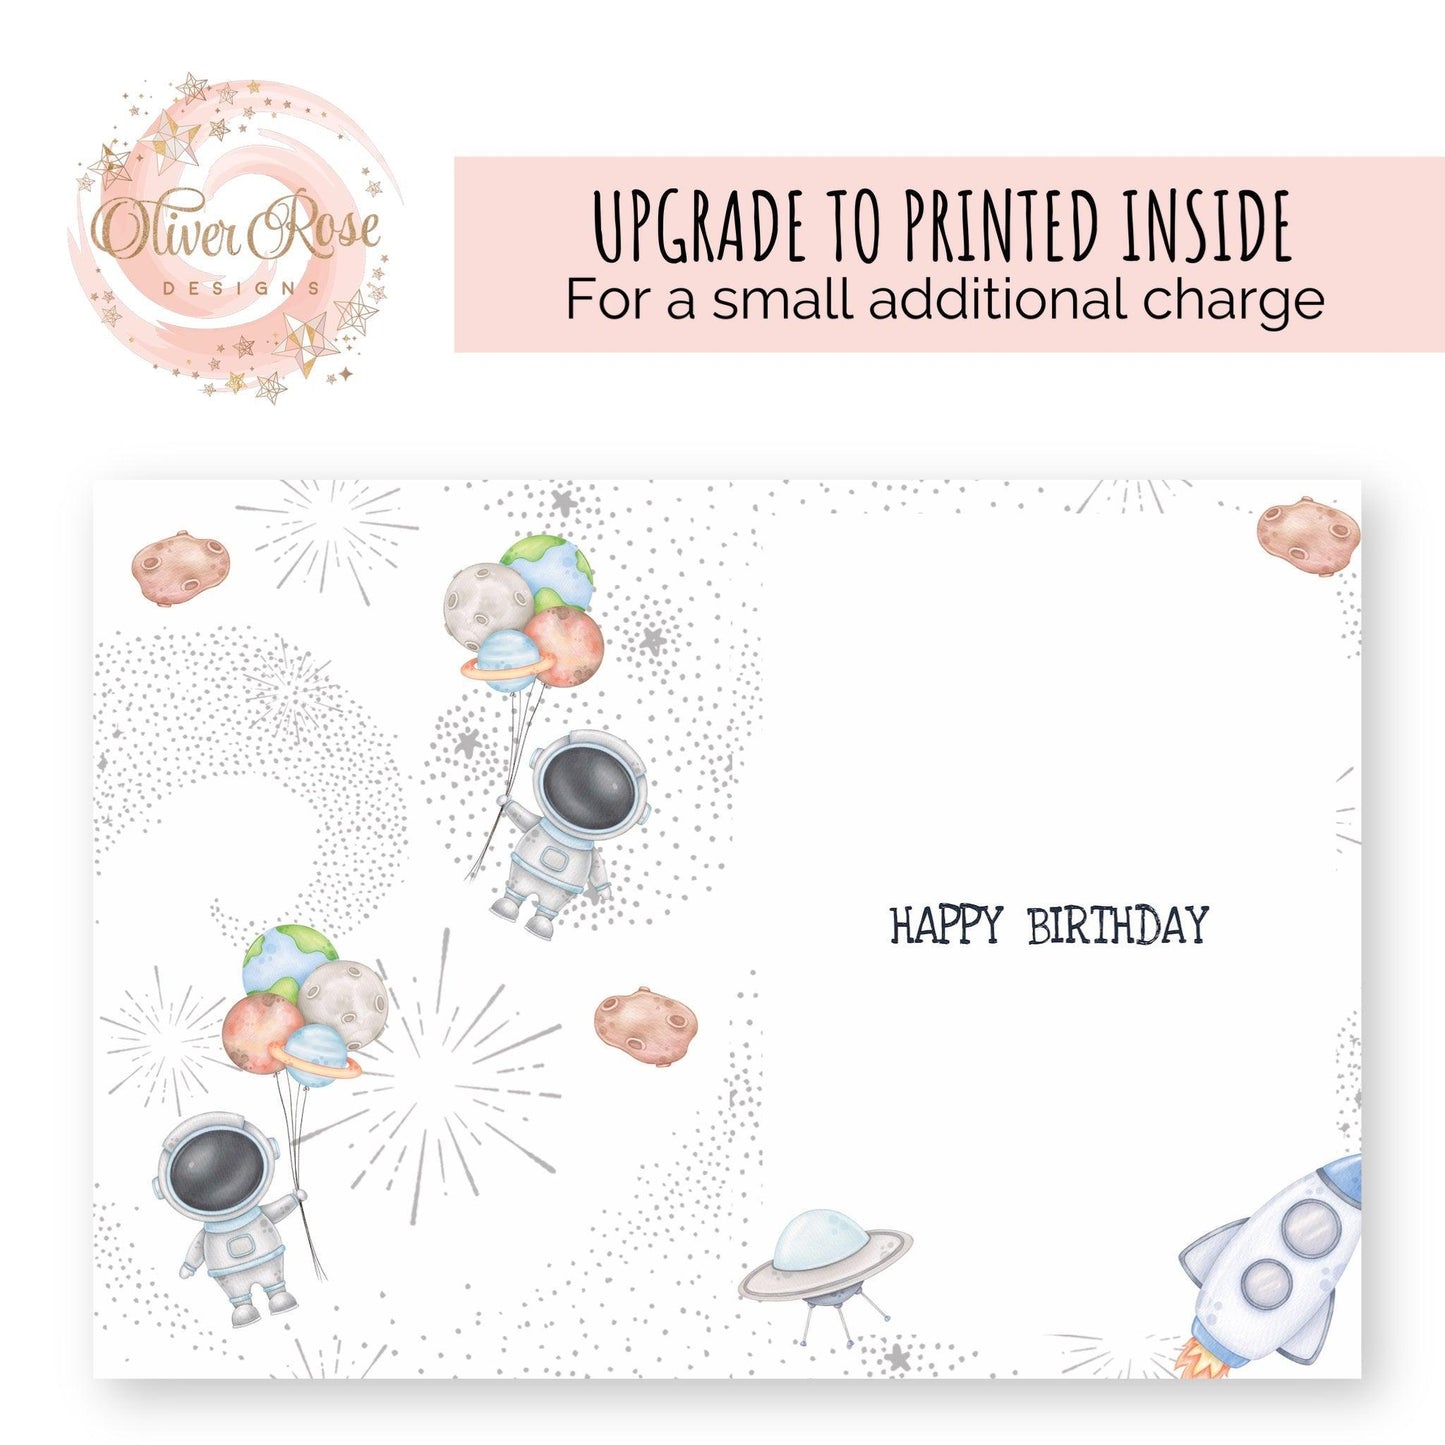 Space Theme Astronaut A5 Matching Printed Design Inside Upgrade, Happy Birthday